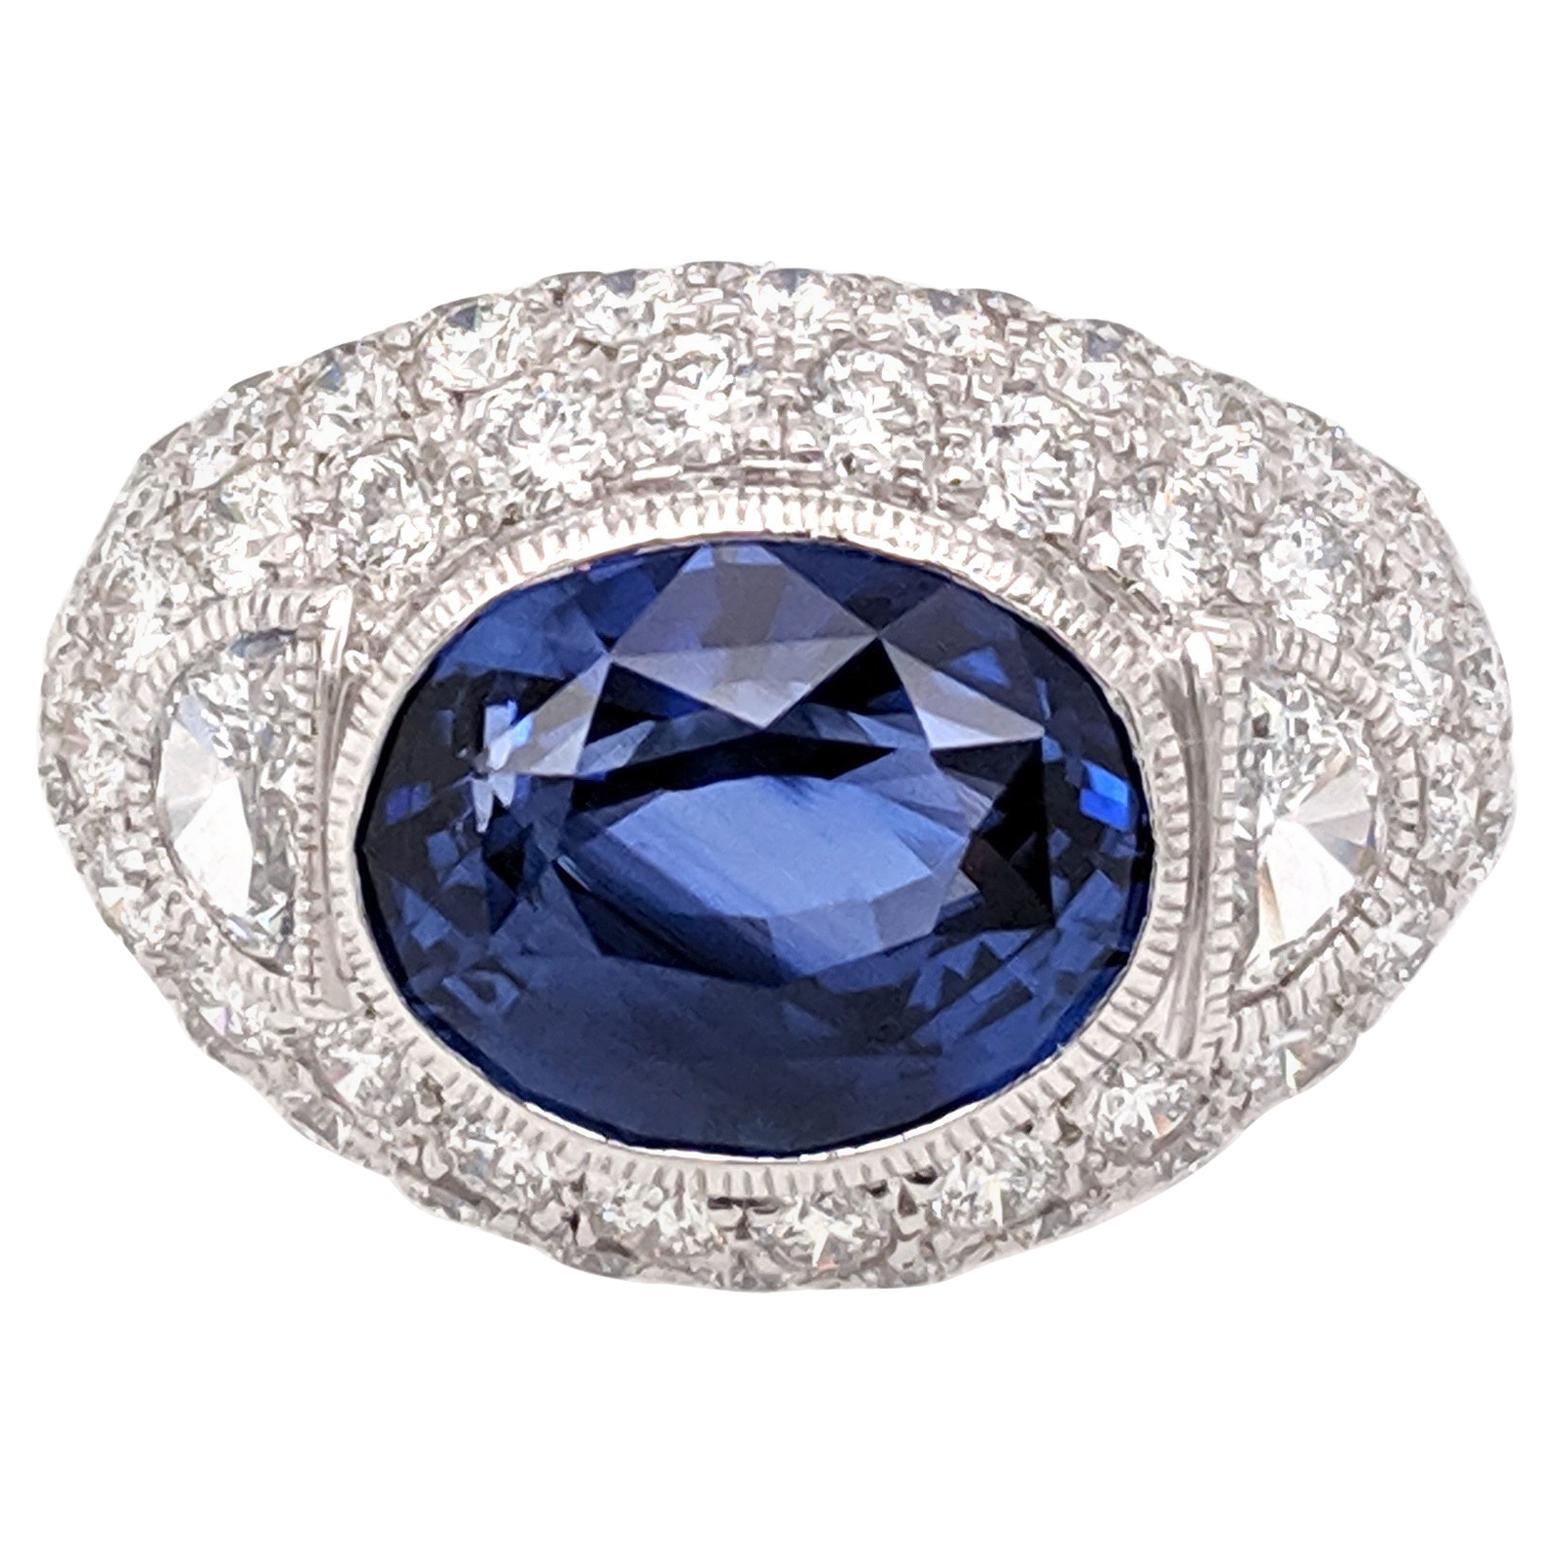 GIA Certified 8.23 Carat Sapphire Diamond Domed Cocktail Ring